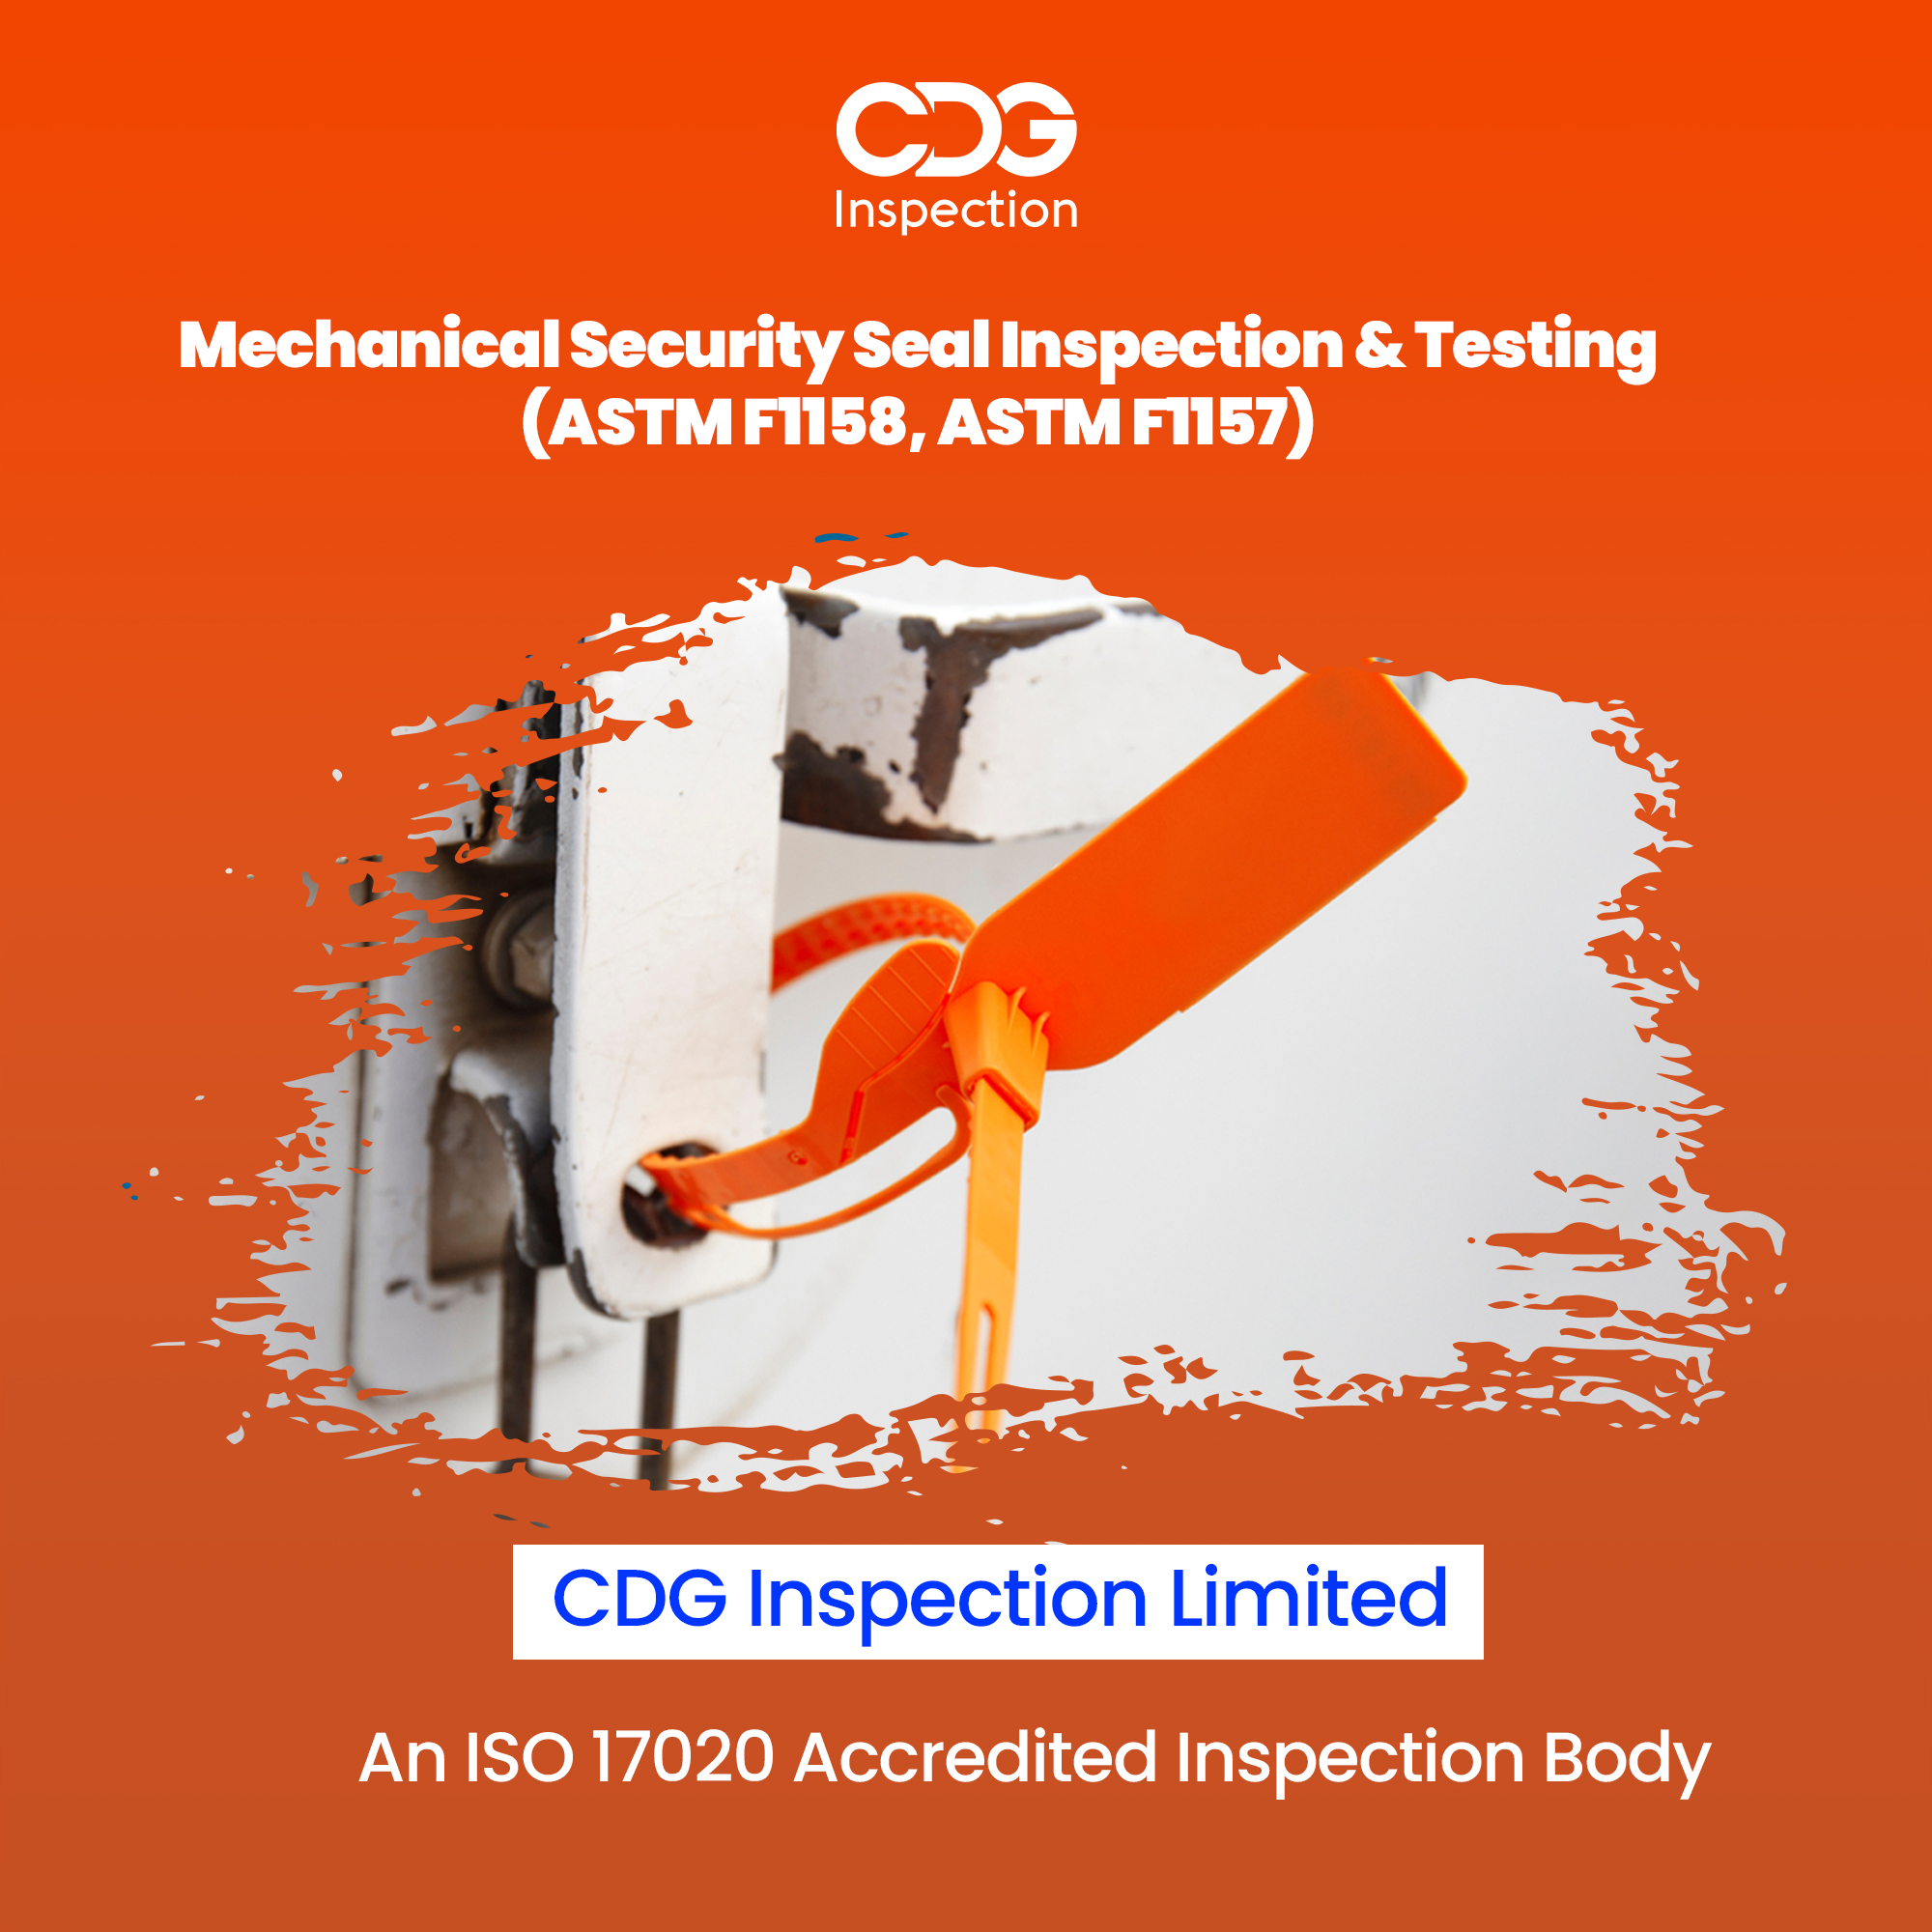 ASTM F1158 Inspection of Security Seal